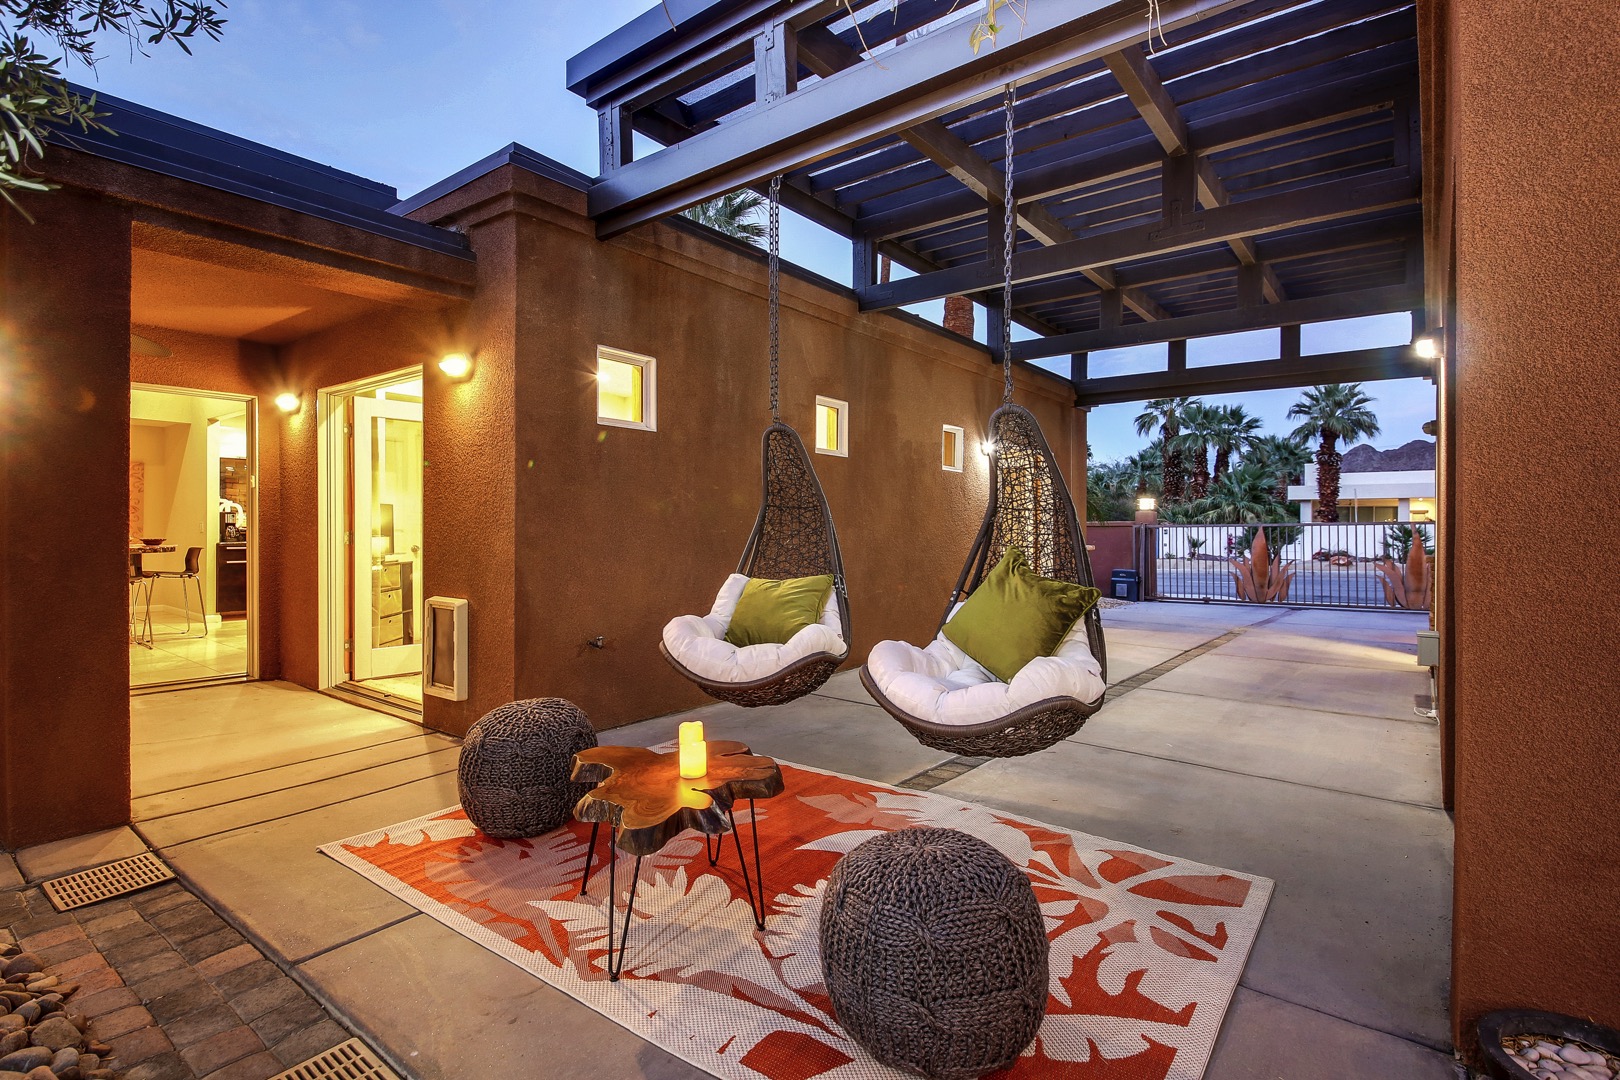 Hang out (literally) on the two trendy swing chairs while you bask in the desert views.